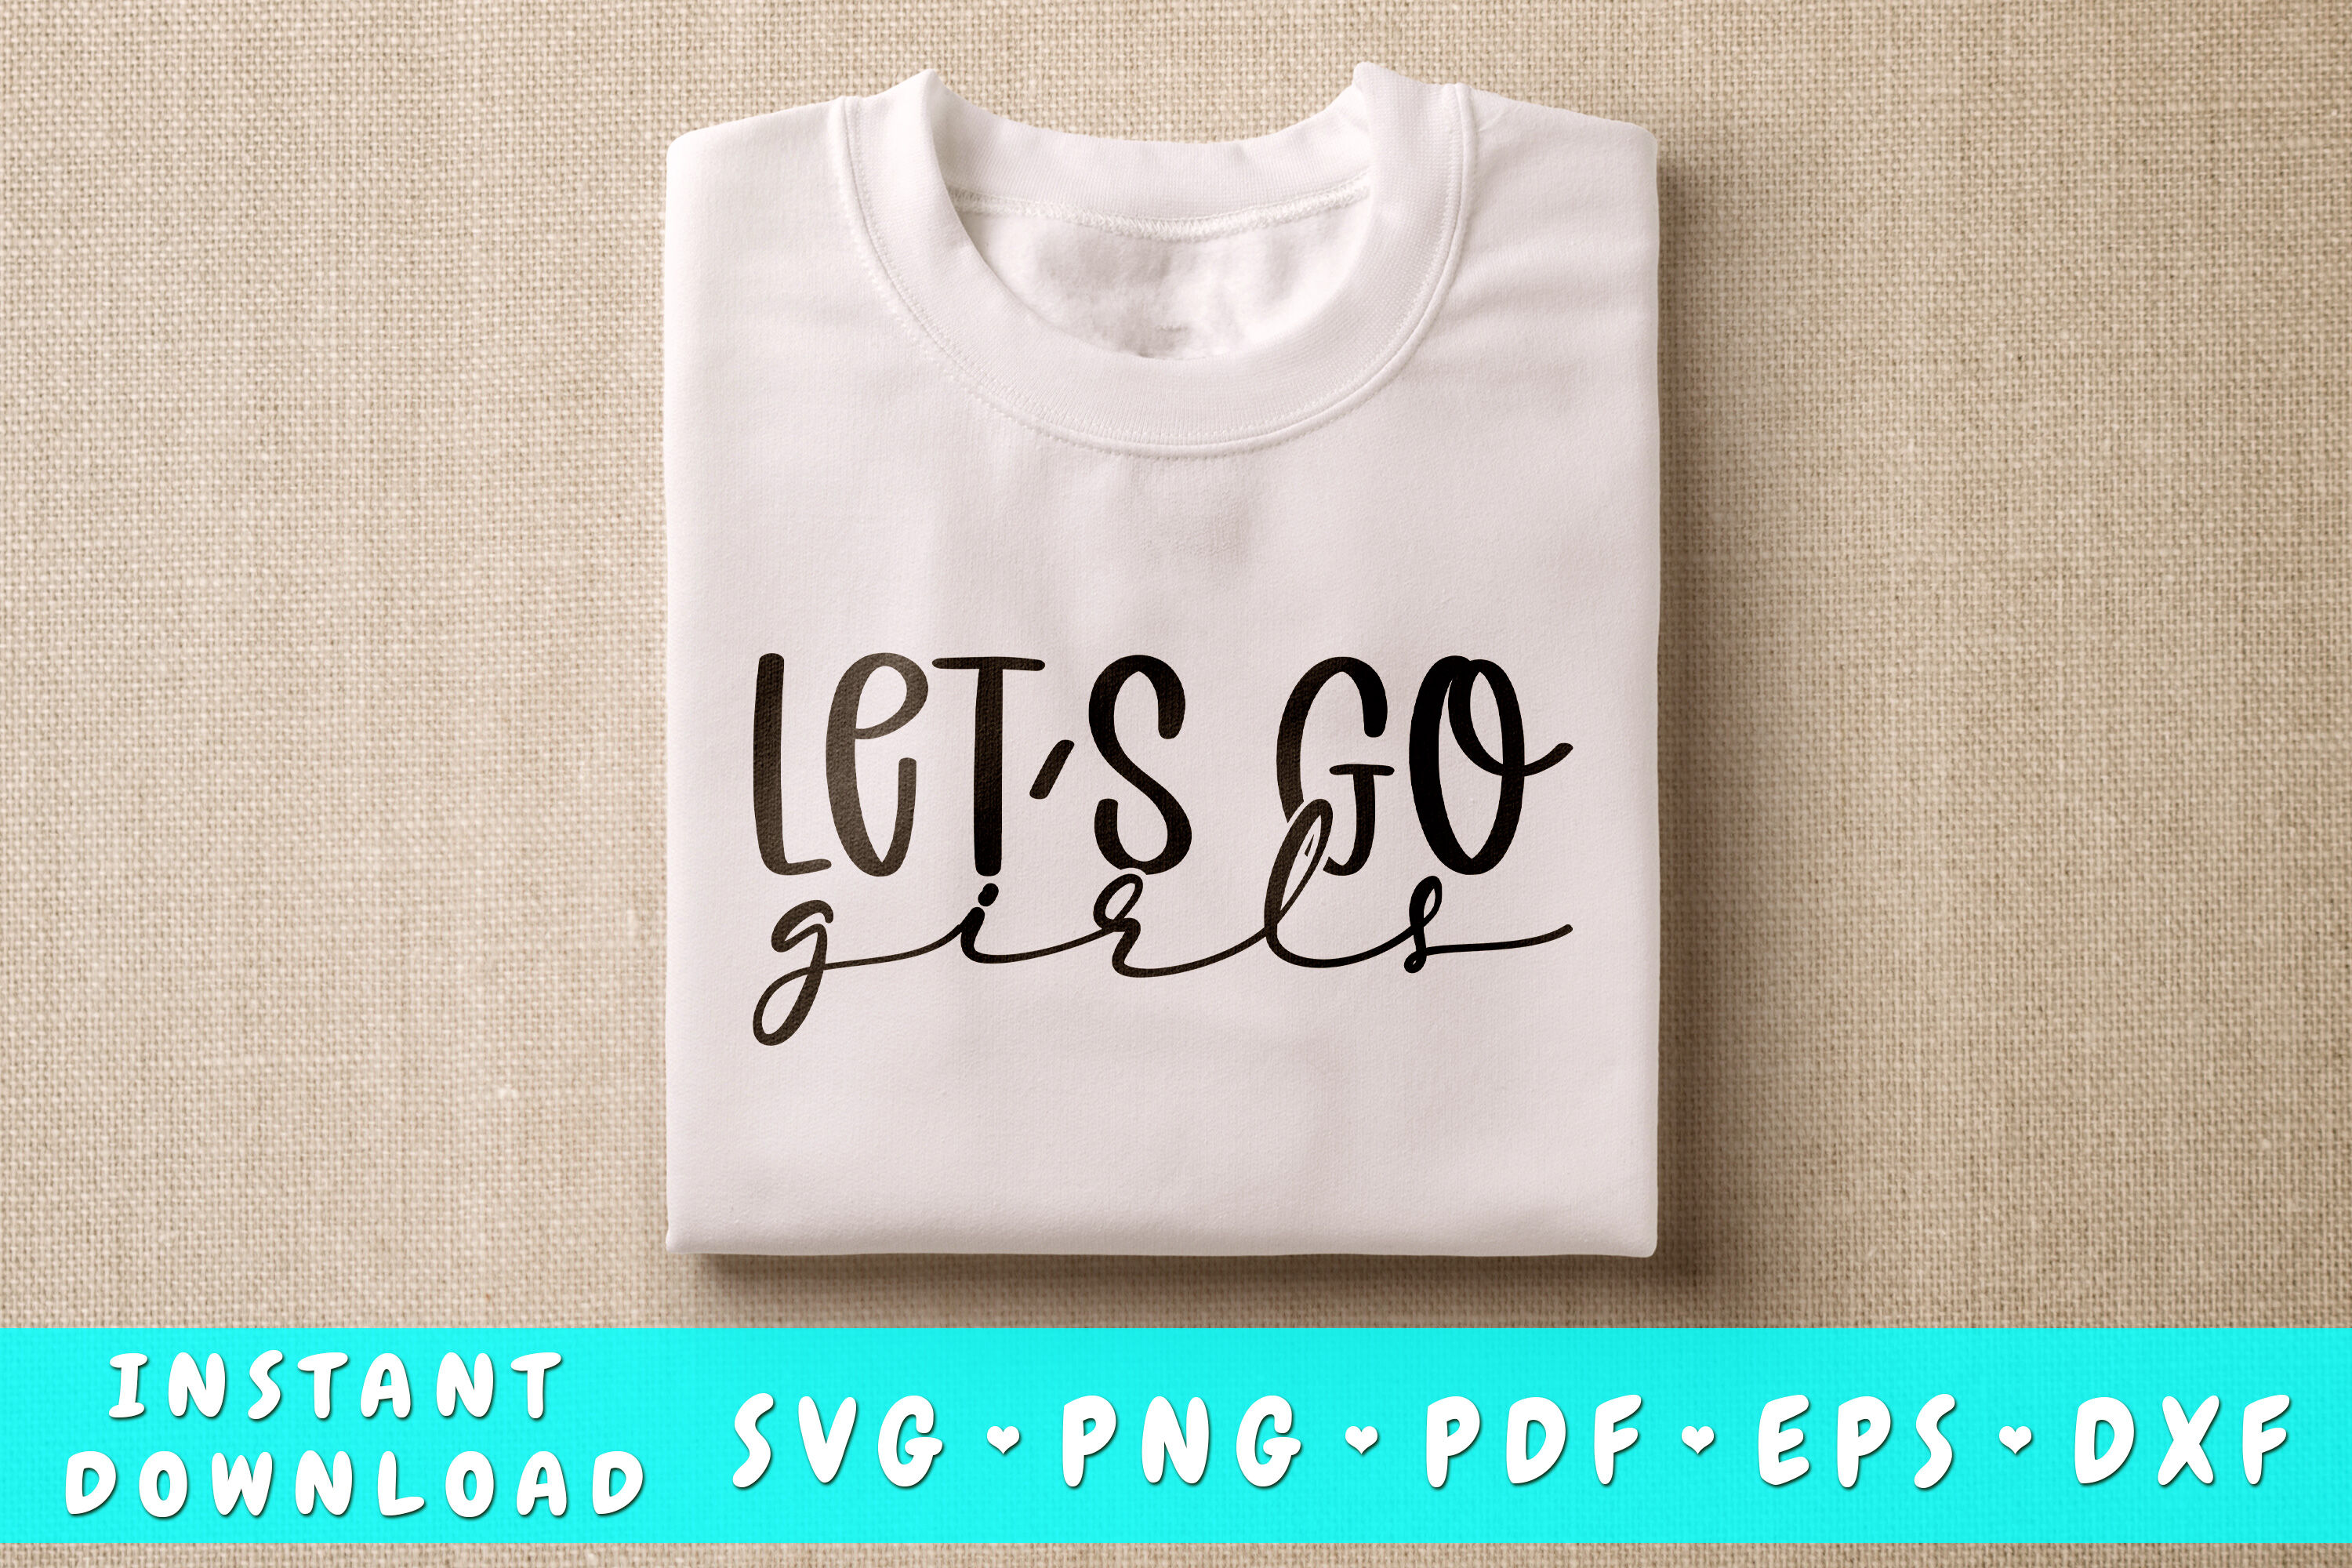 Let's Go Girls Svg Graphic by TRUTHkeep · Creative Fabrica